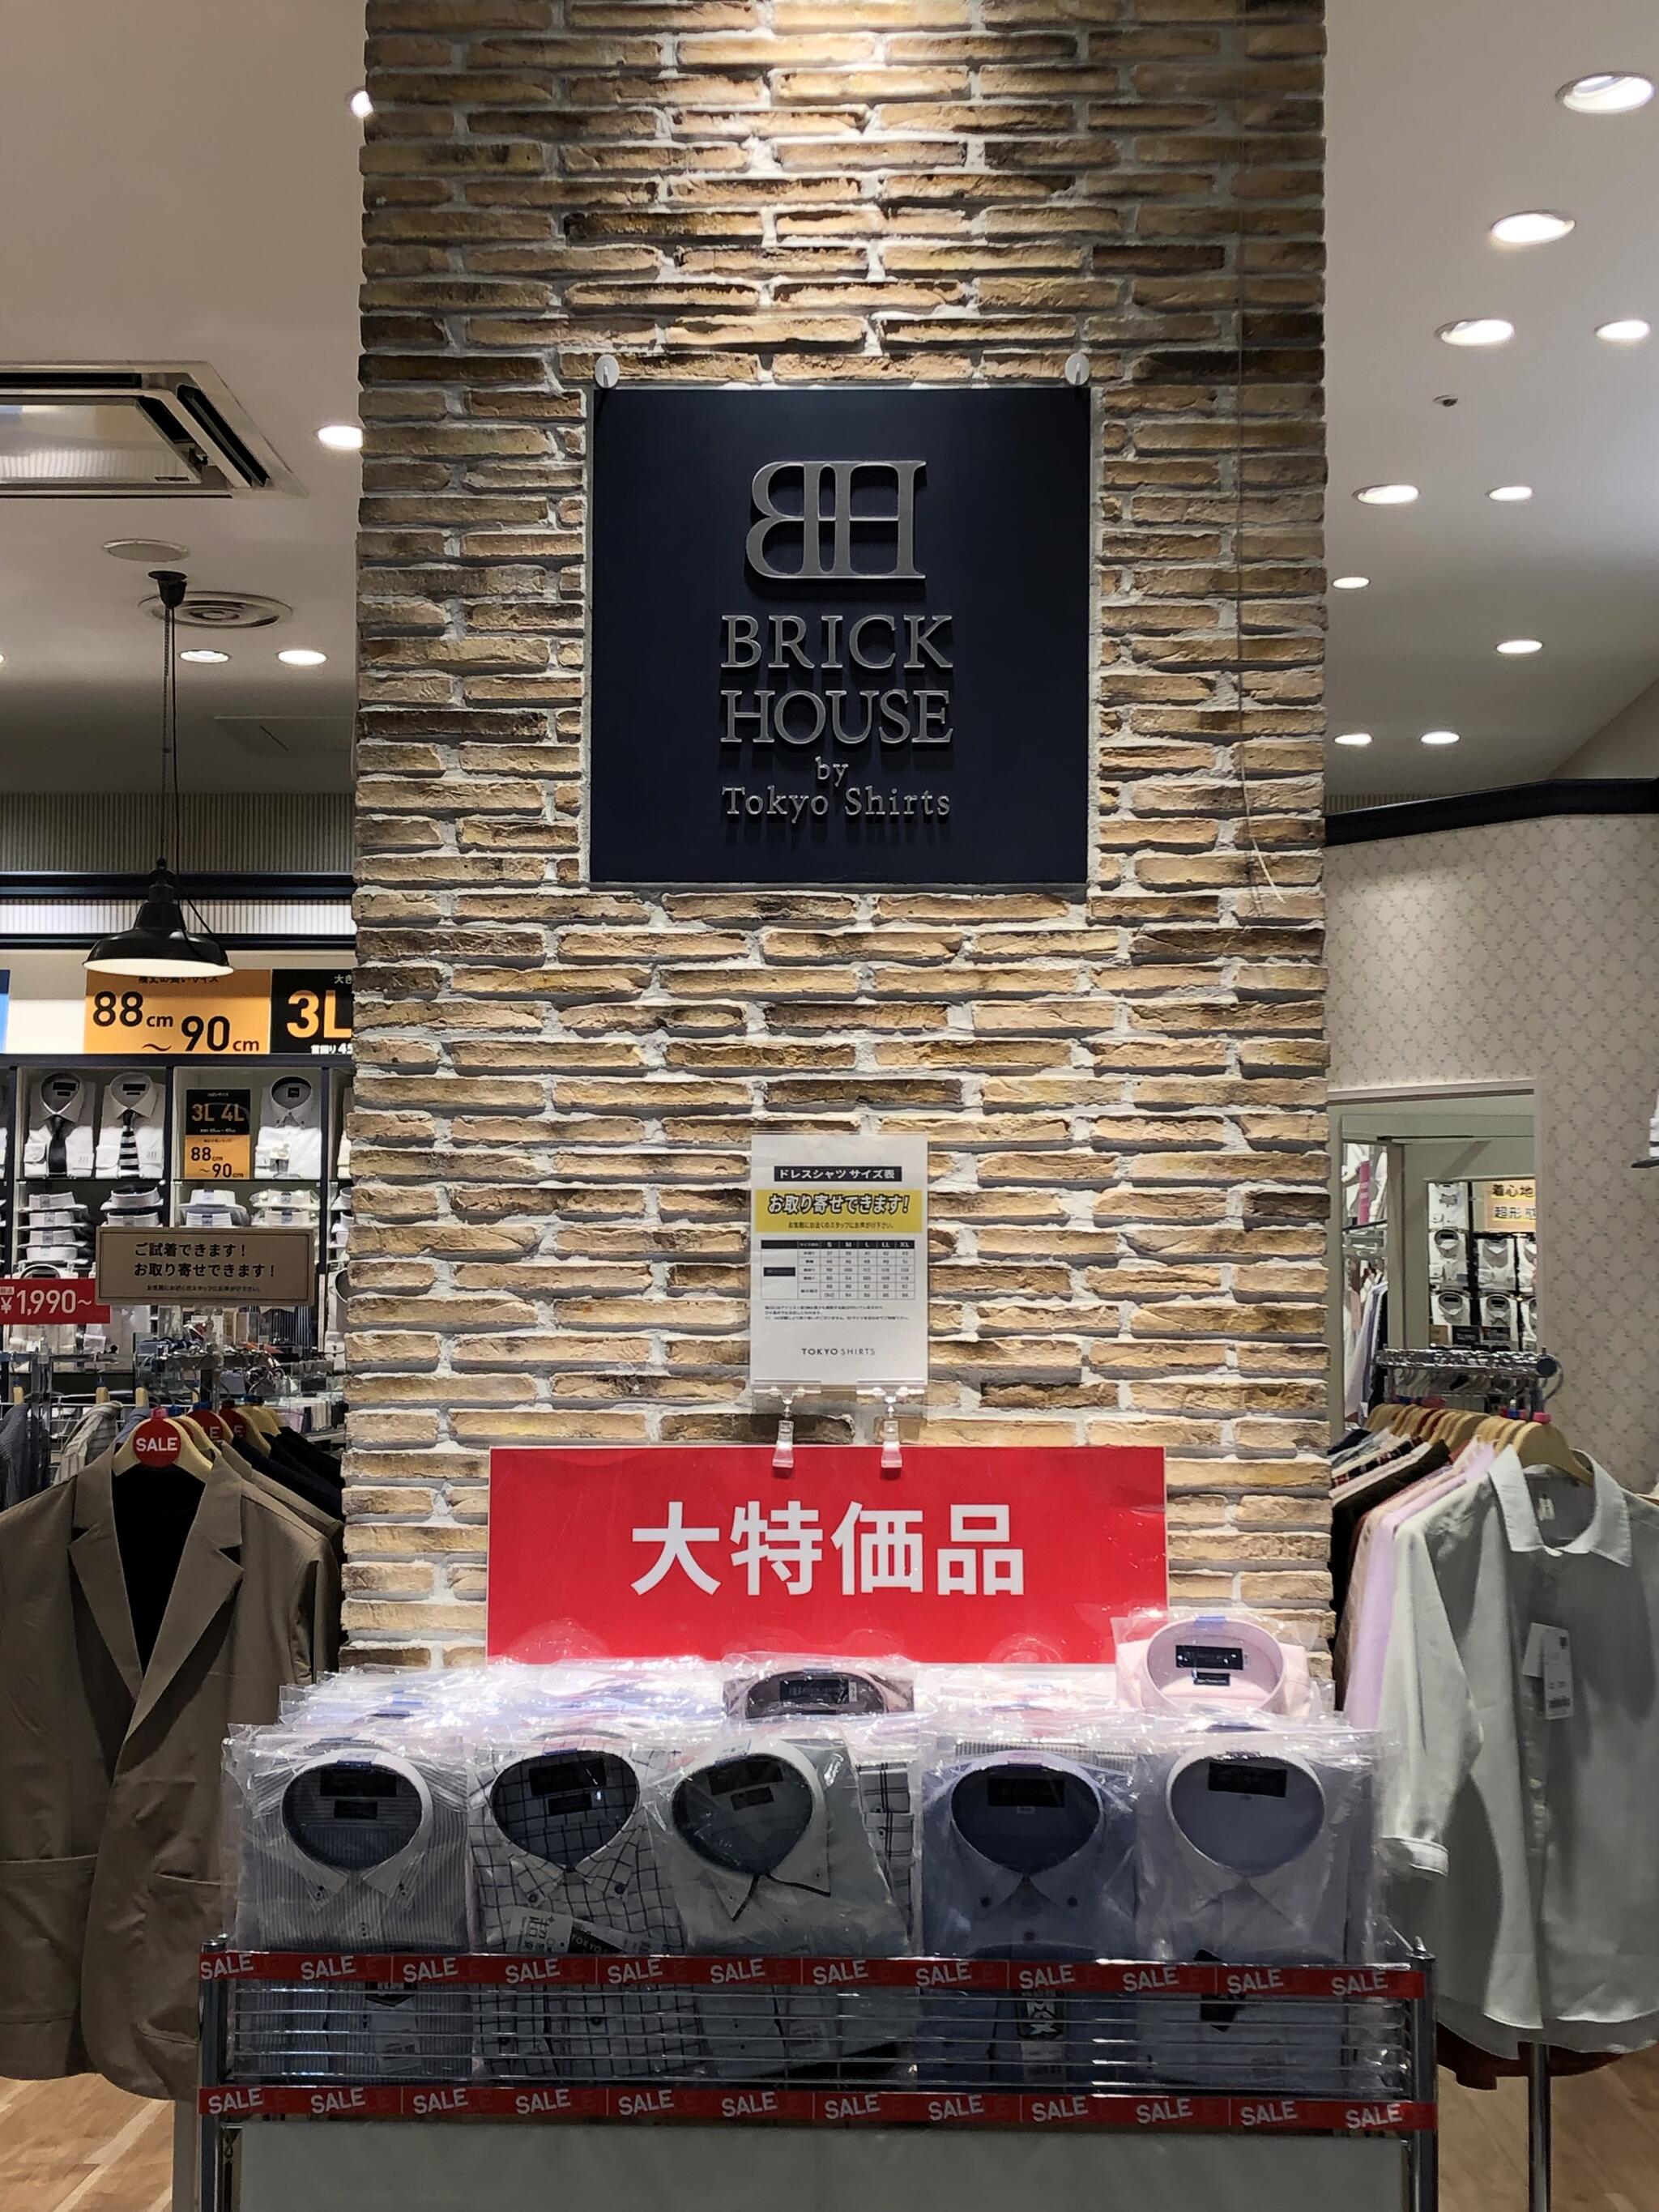 BRICK HOUSE by Tokyo shirts 名古屋茶屋イオンモール店 - 名古屋市港 